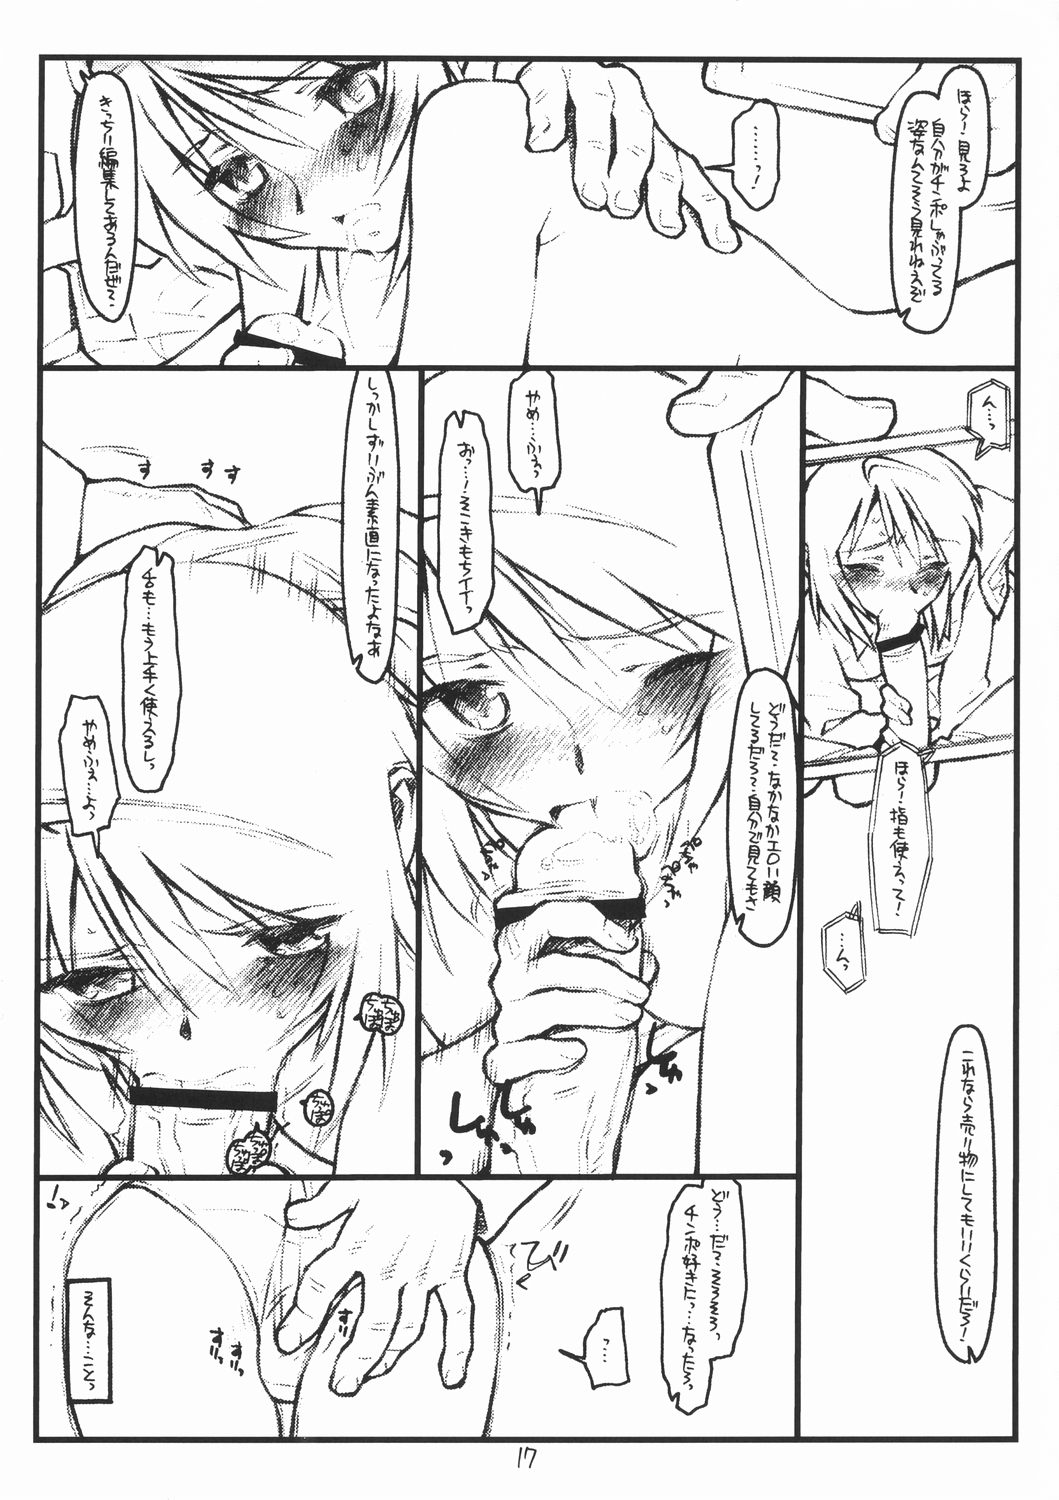 (SC28) [bolze. (rit.)] Miscoordination. (Mobile Suit Gundam SEED DESTINY) page 16 full